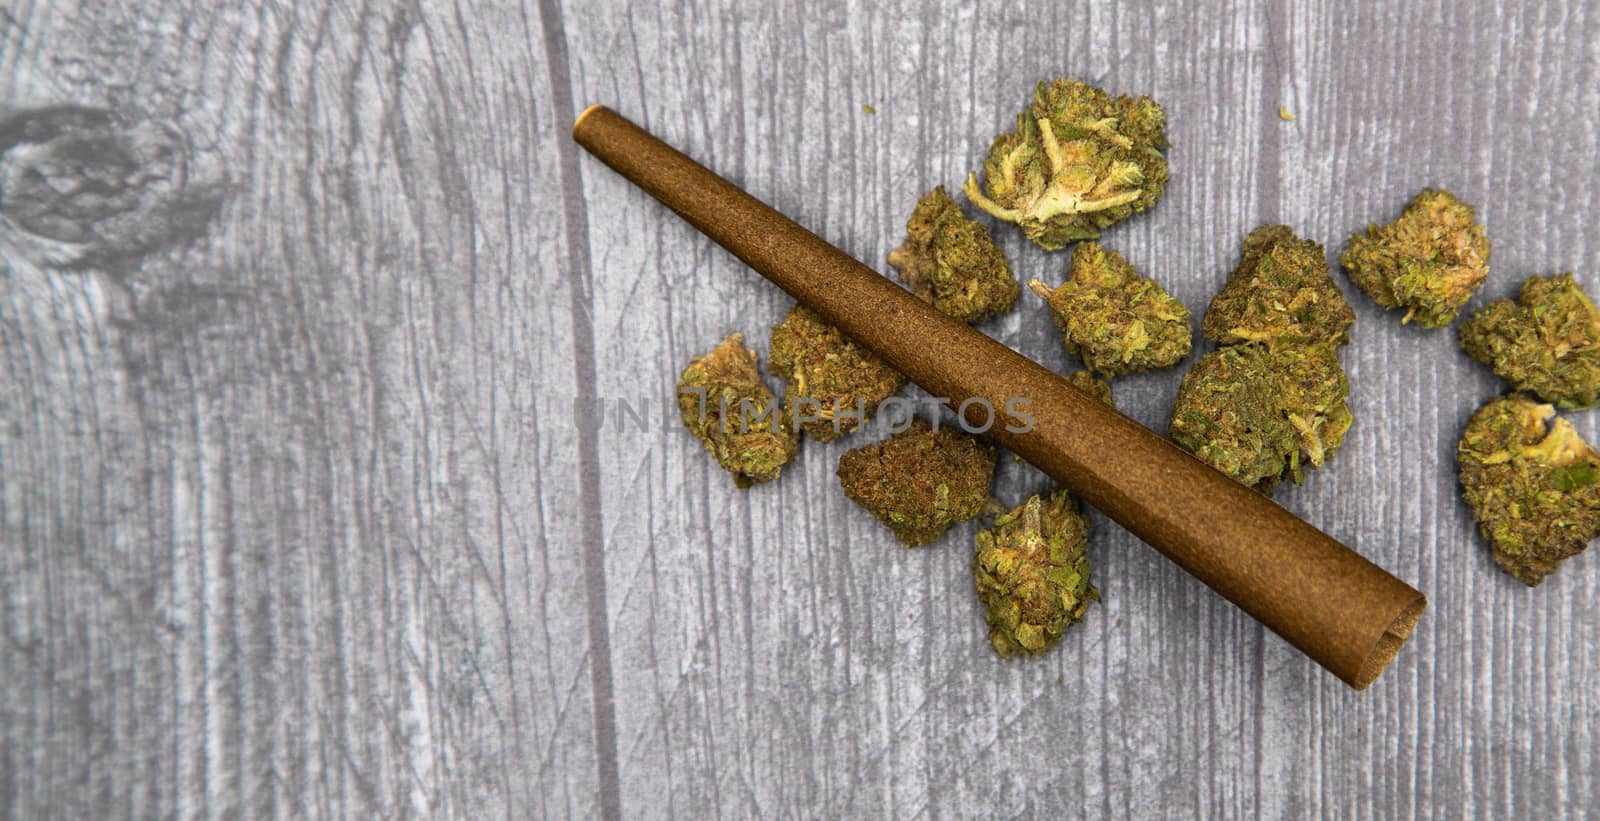 Several bright green medical marijuana buds on a wooden surface with a brown hemp wrap on top.